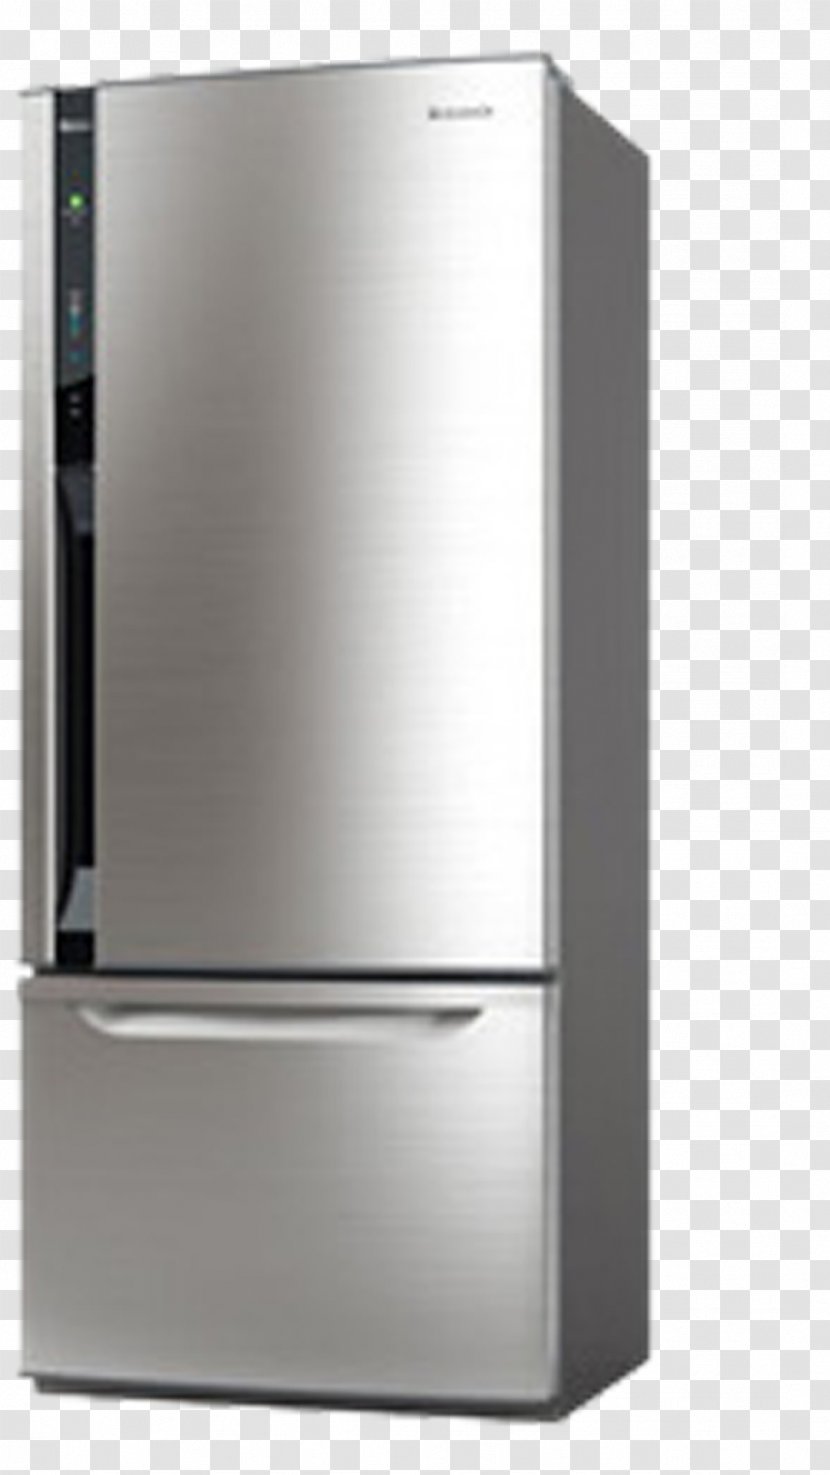 Panasonic Refrigerator Auto-defrost Home Appliance Direct Cool - Autodefrost Transparent PNG